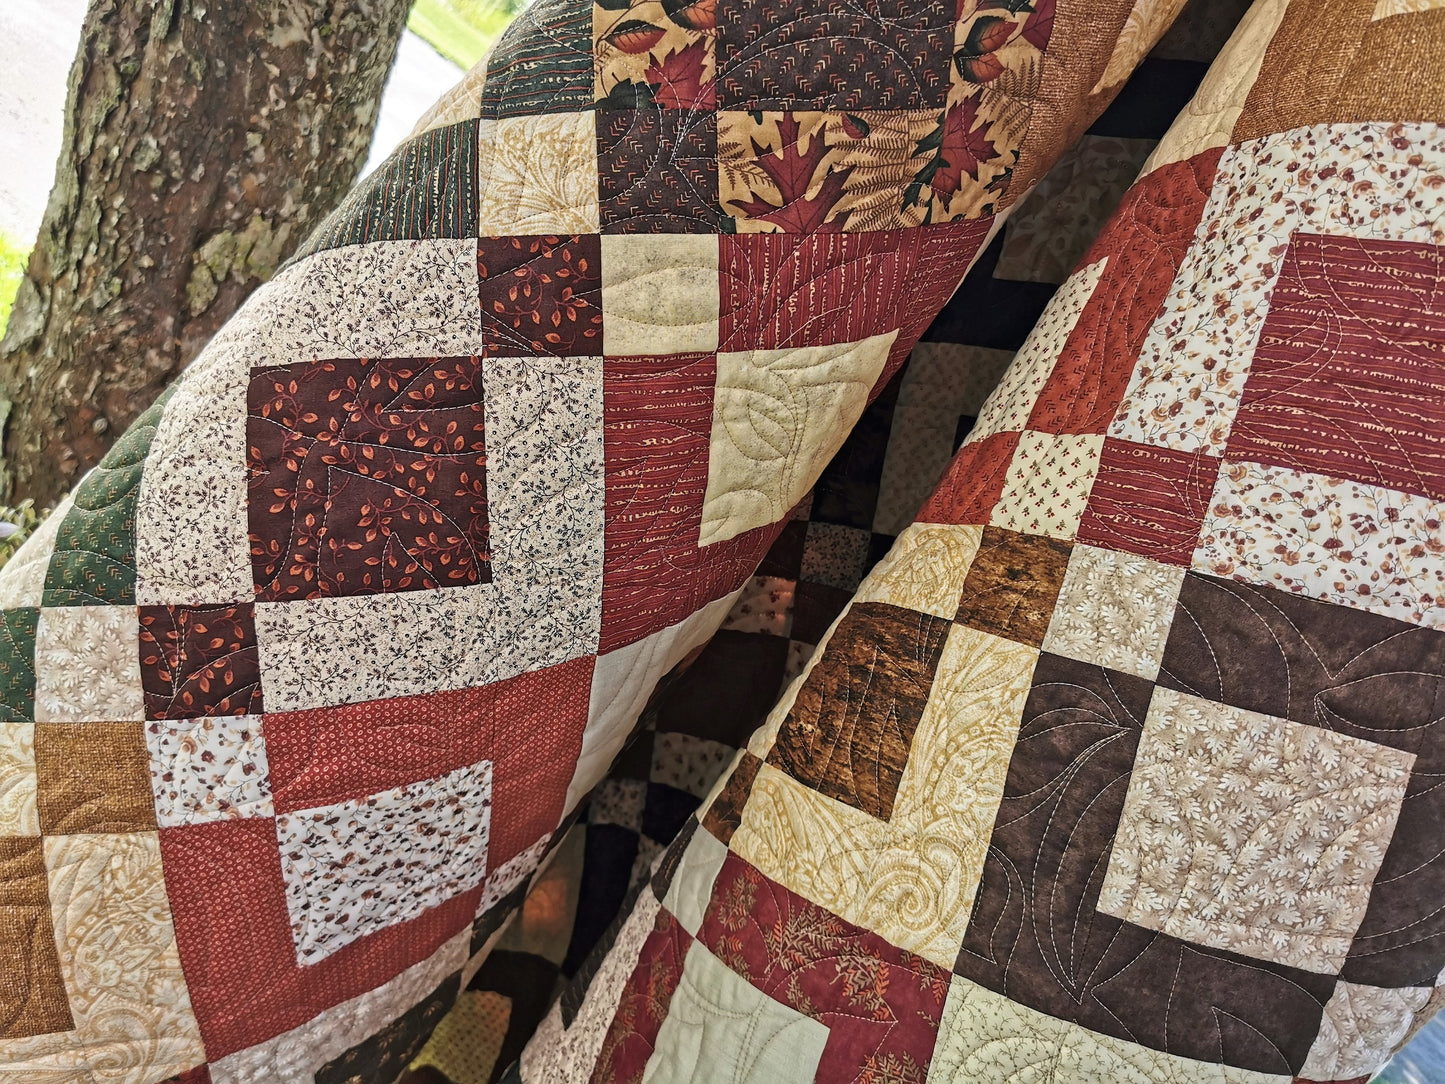 very close view of the quilt showing piecing and quilting design